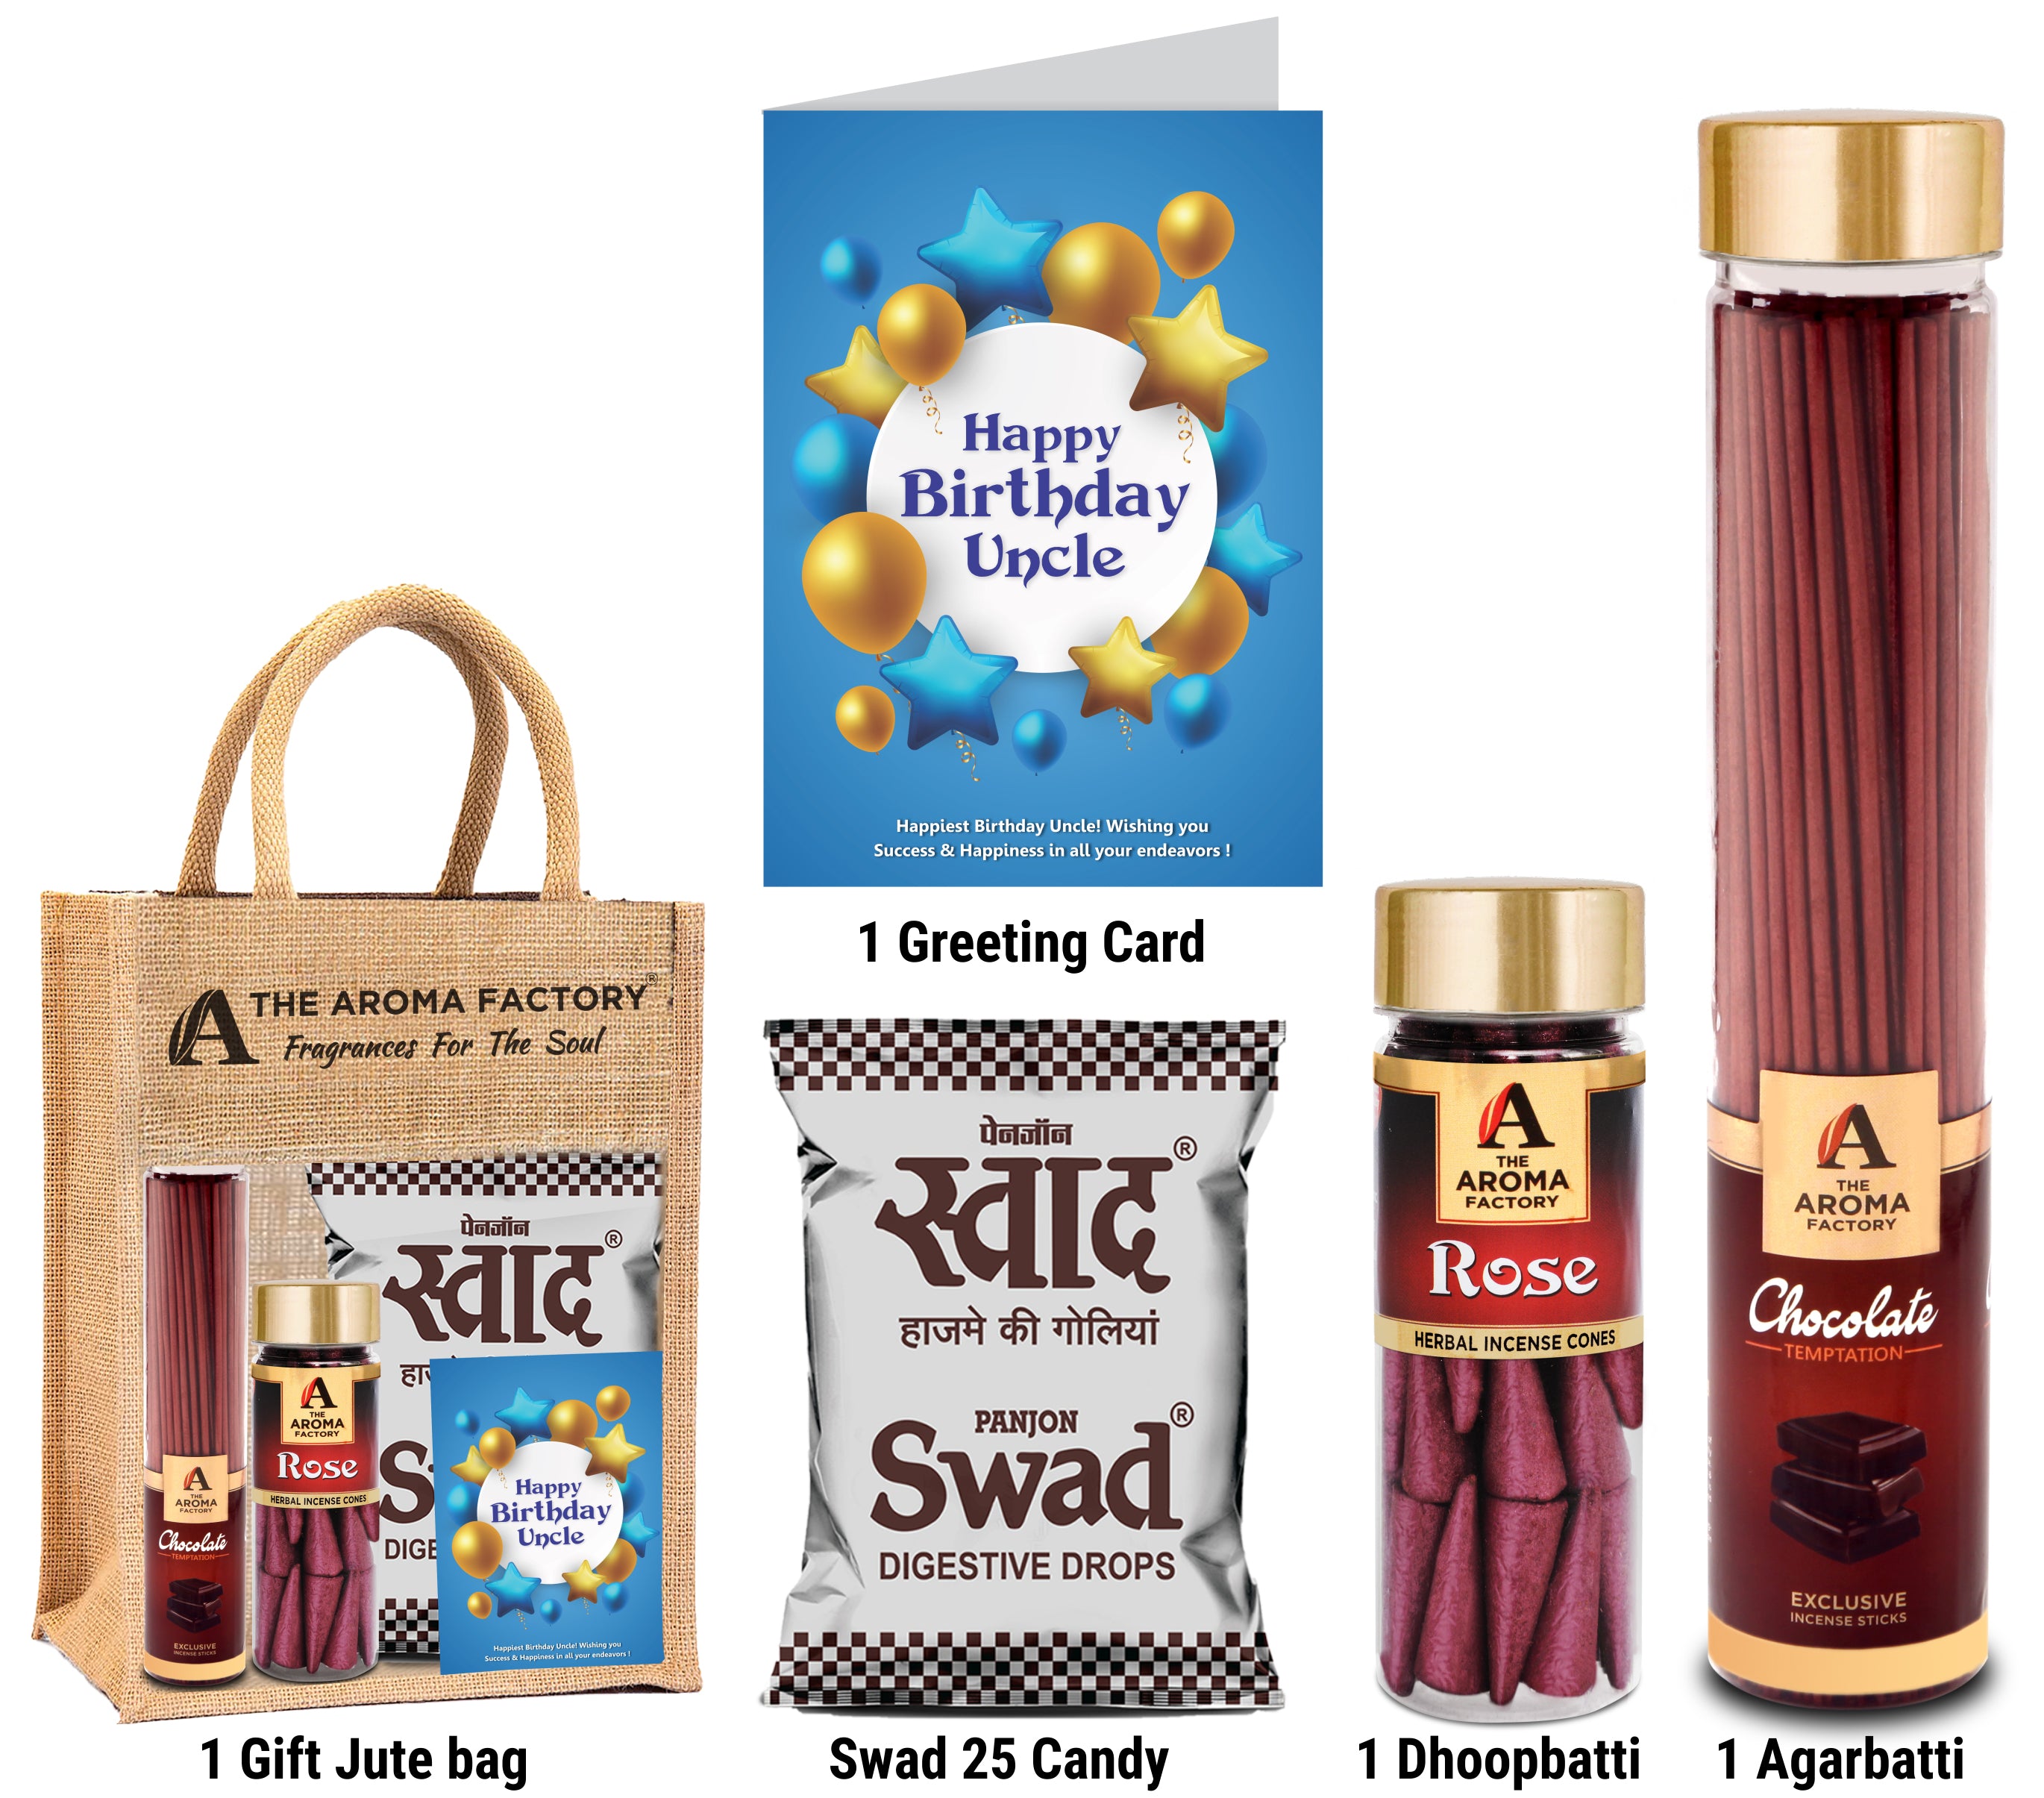 The Aroma Factory Happy Birthday Uncle Gift with Card (25 Swad Candy, Chocolate Agarbatti Bottle, Rose Cone) in Jute Bag